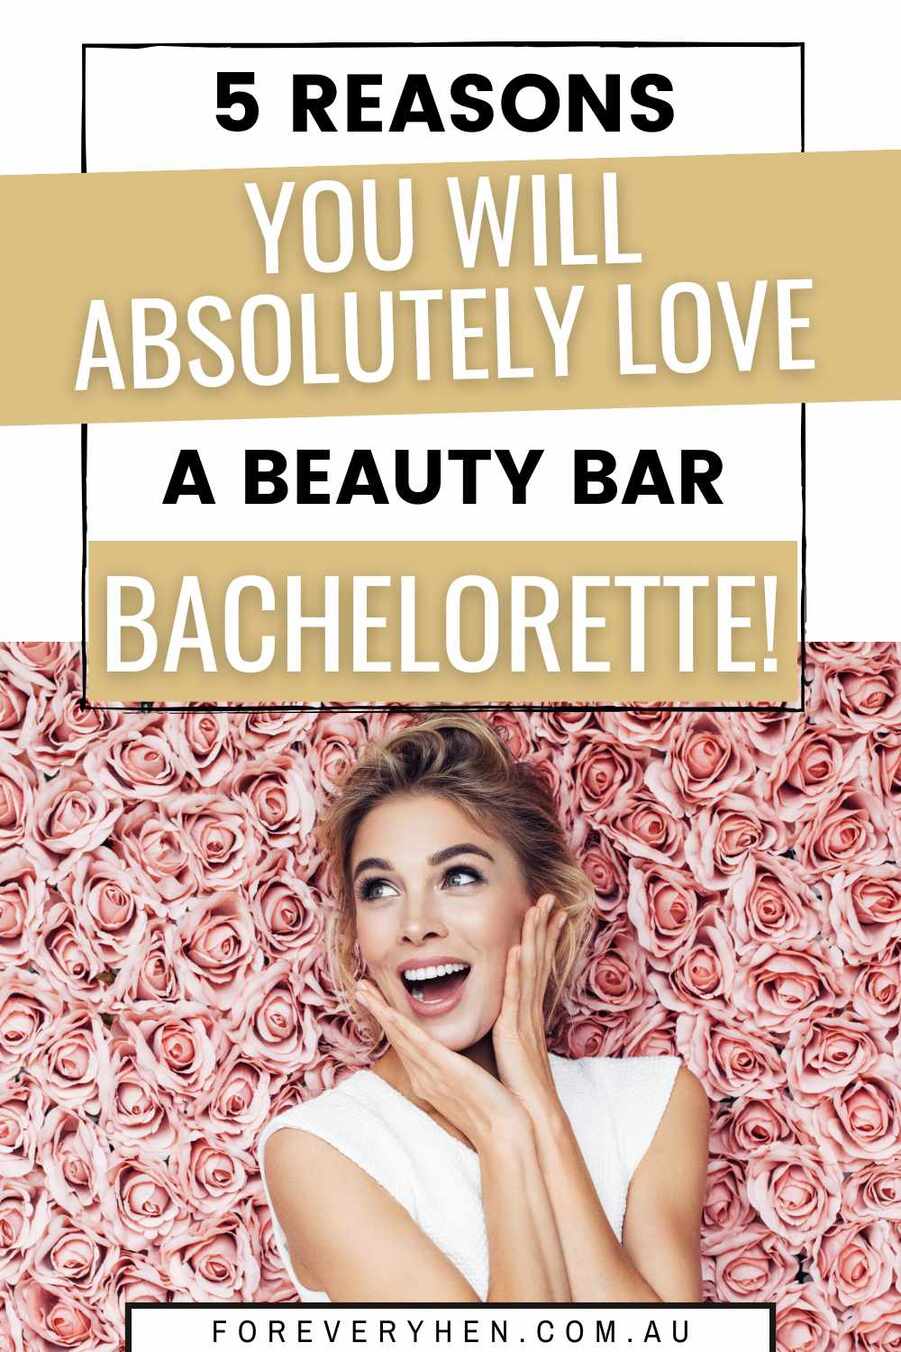 A woman smiling in front of a flower wall (featuring pink roses). Text overlay: 5 reasons you will absolutely love a beauty bar bachelorette!